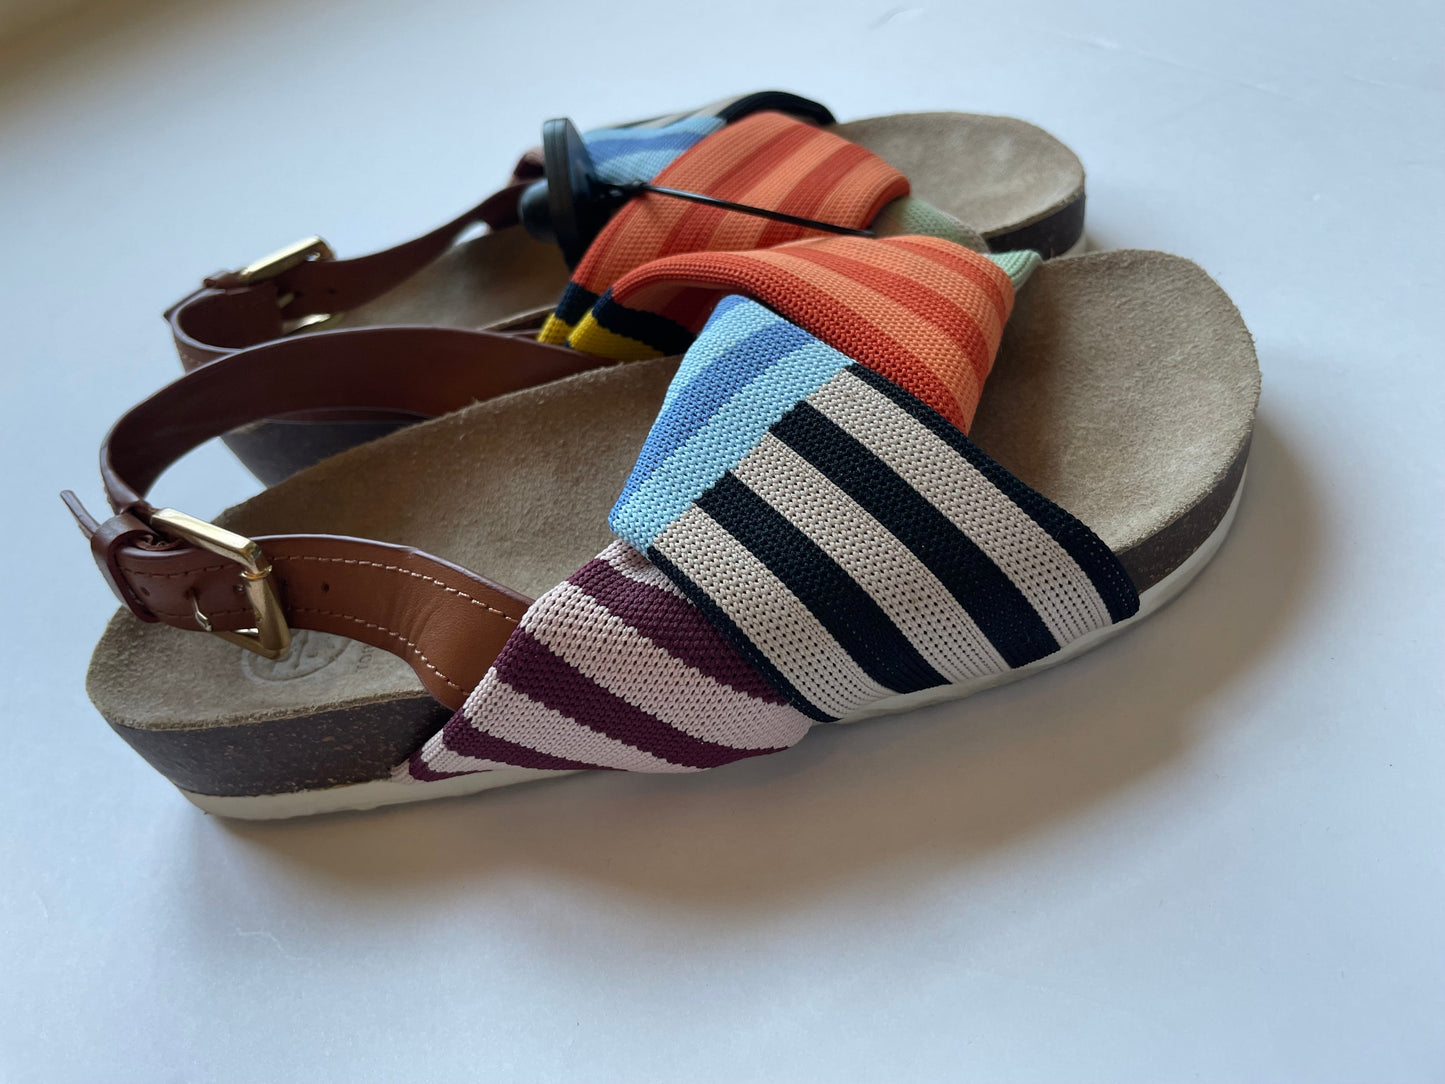 Multi-colored Sandals Flats Tory Burch, Size 7.5